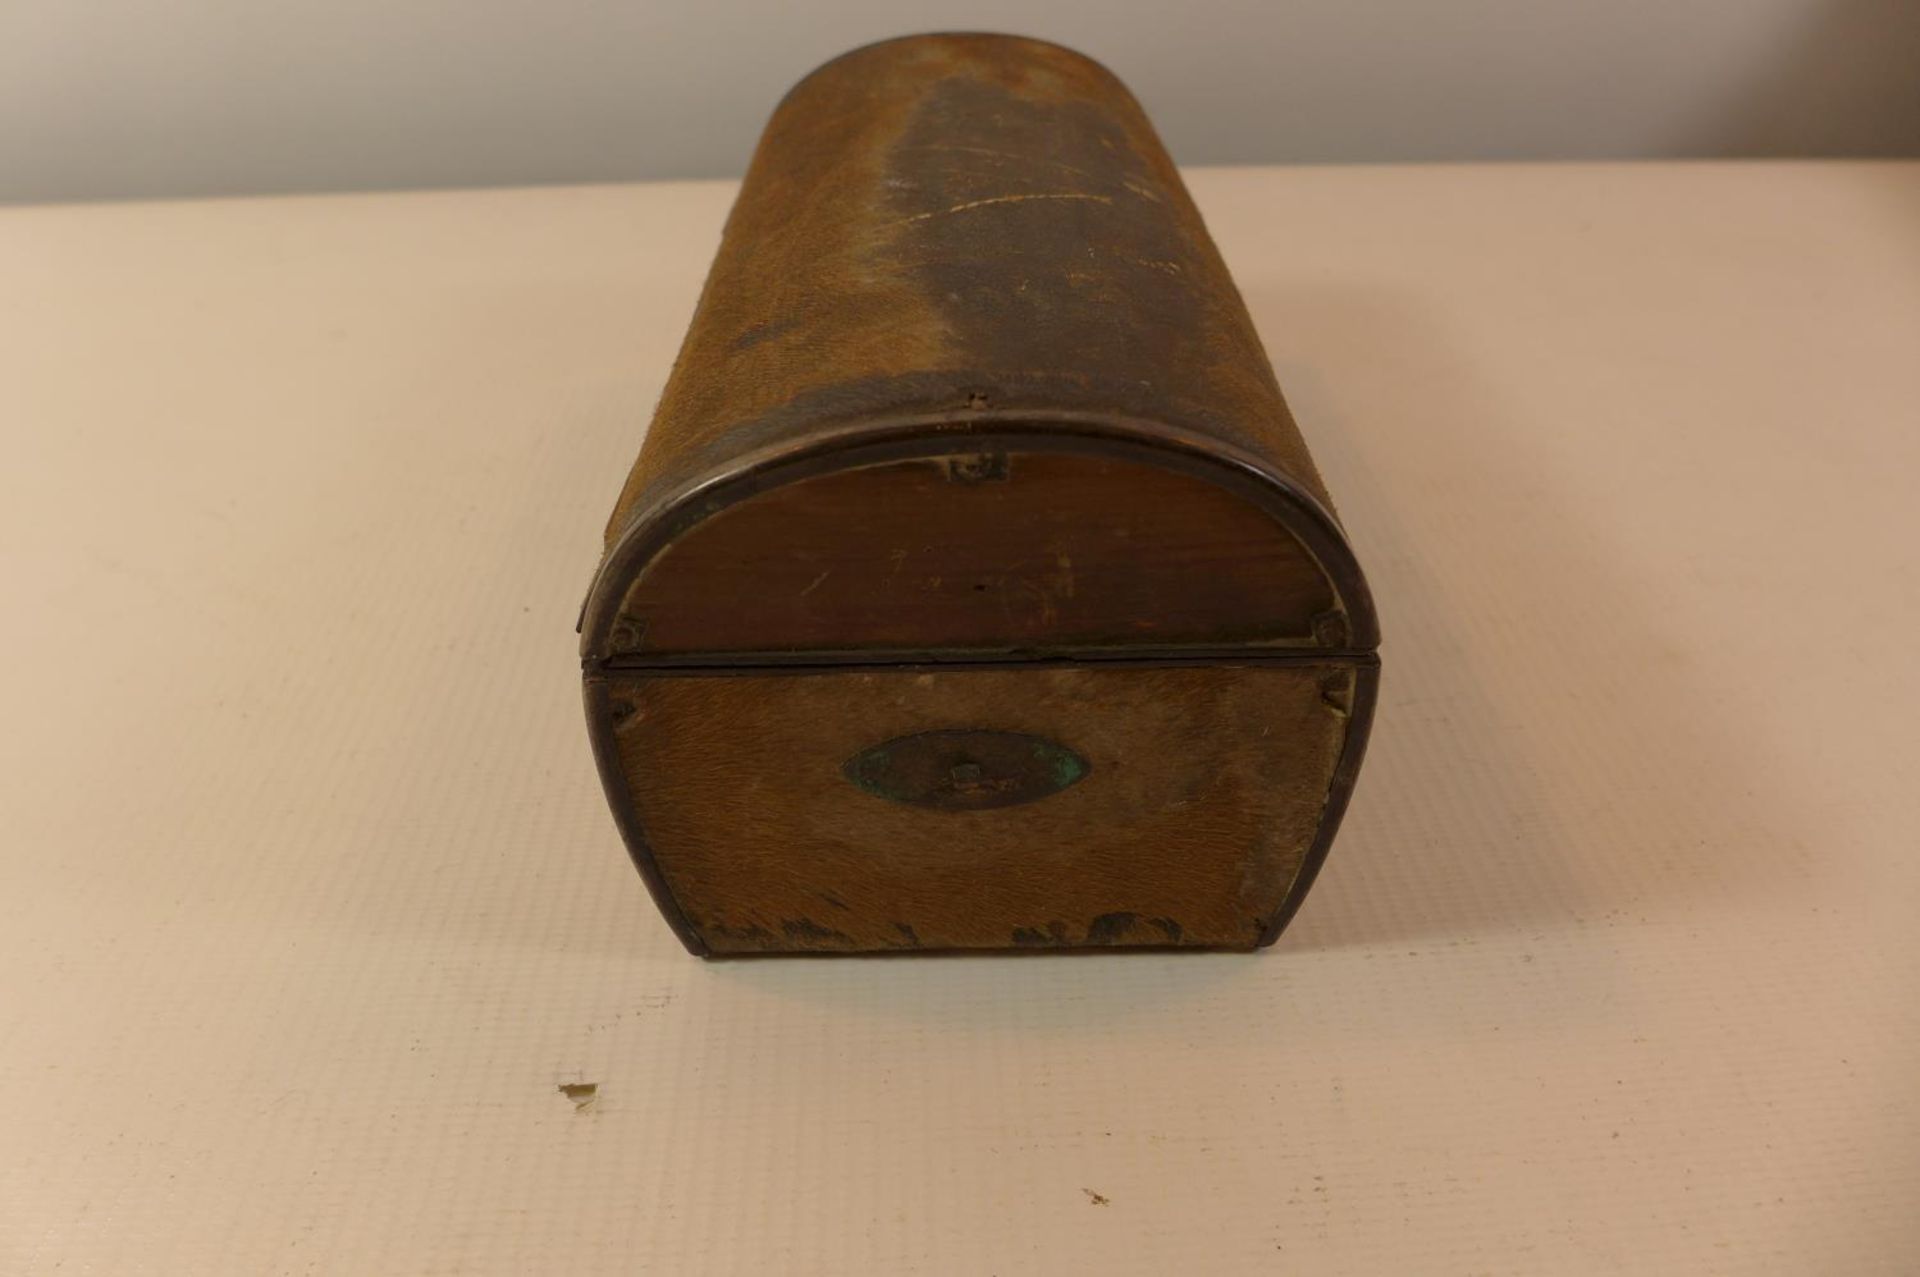 A NAPOLIONIC WAR PERIOD DOMED BOX WITH THE INSCRIPTION "LIEUTENANT ROBERT SPENS PARK 58TH REGIMENT - Image 3 of 8